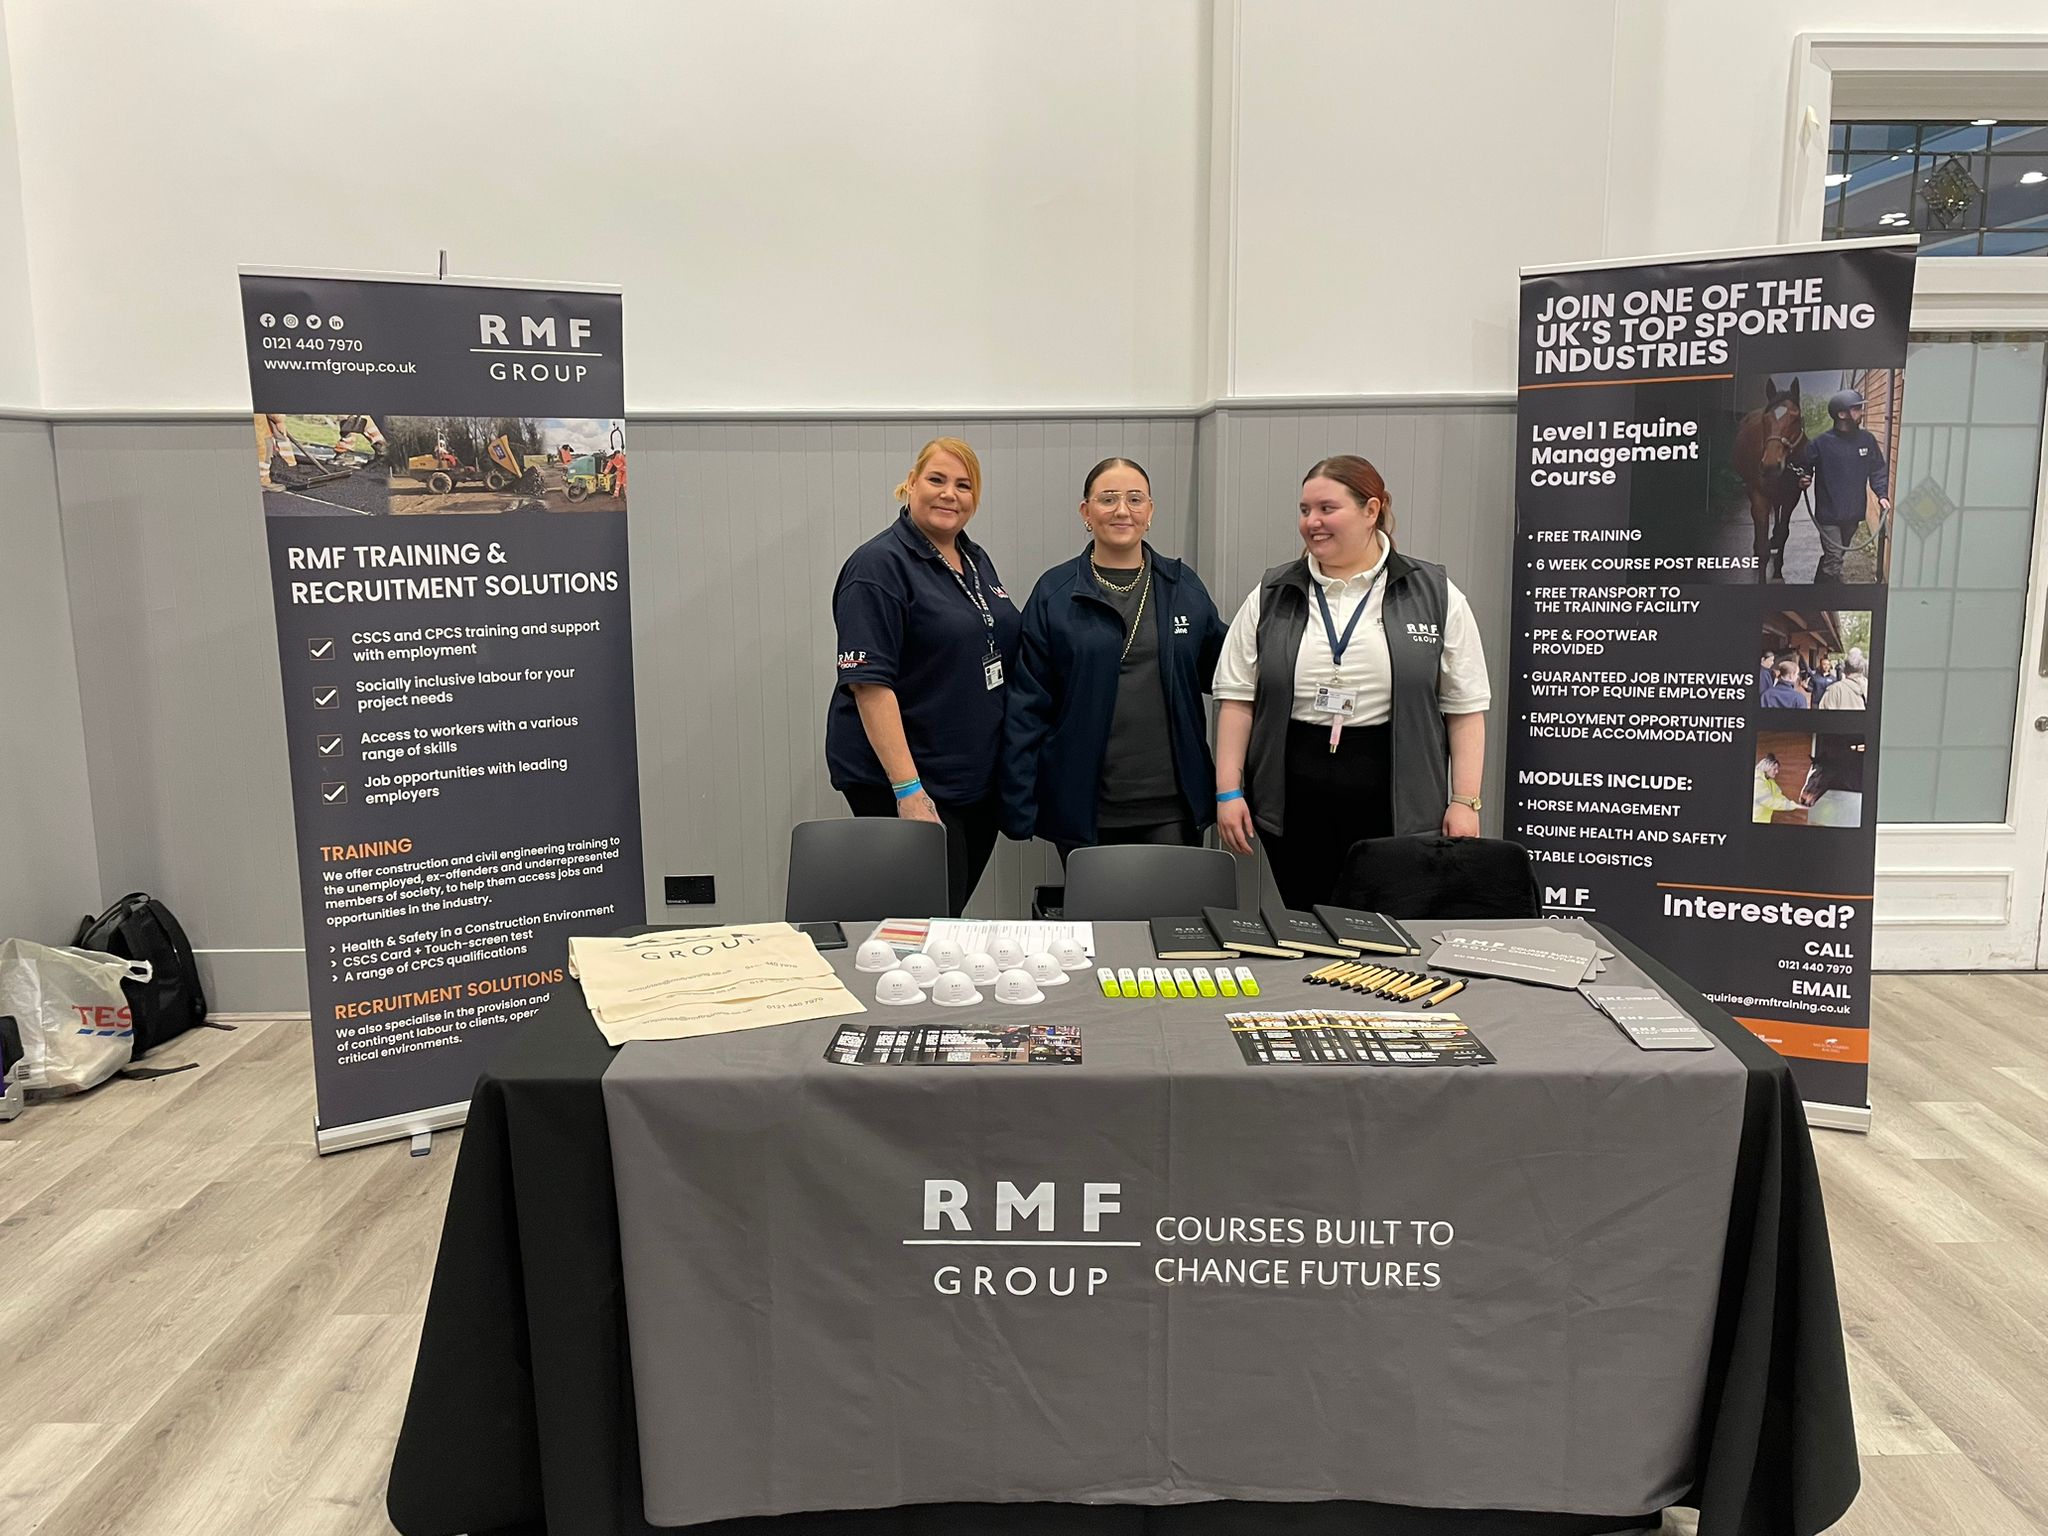 RMF at our event in Birmingham